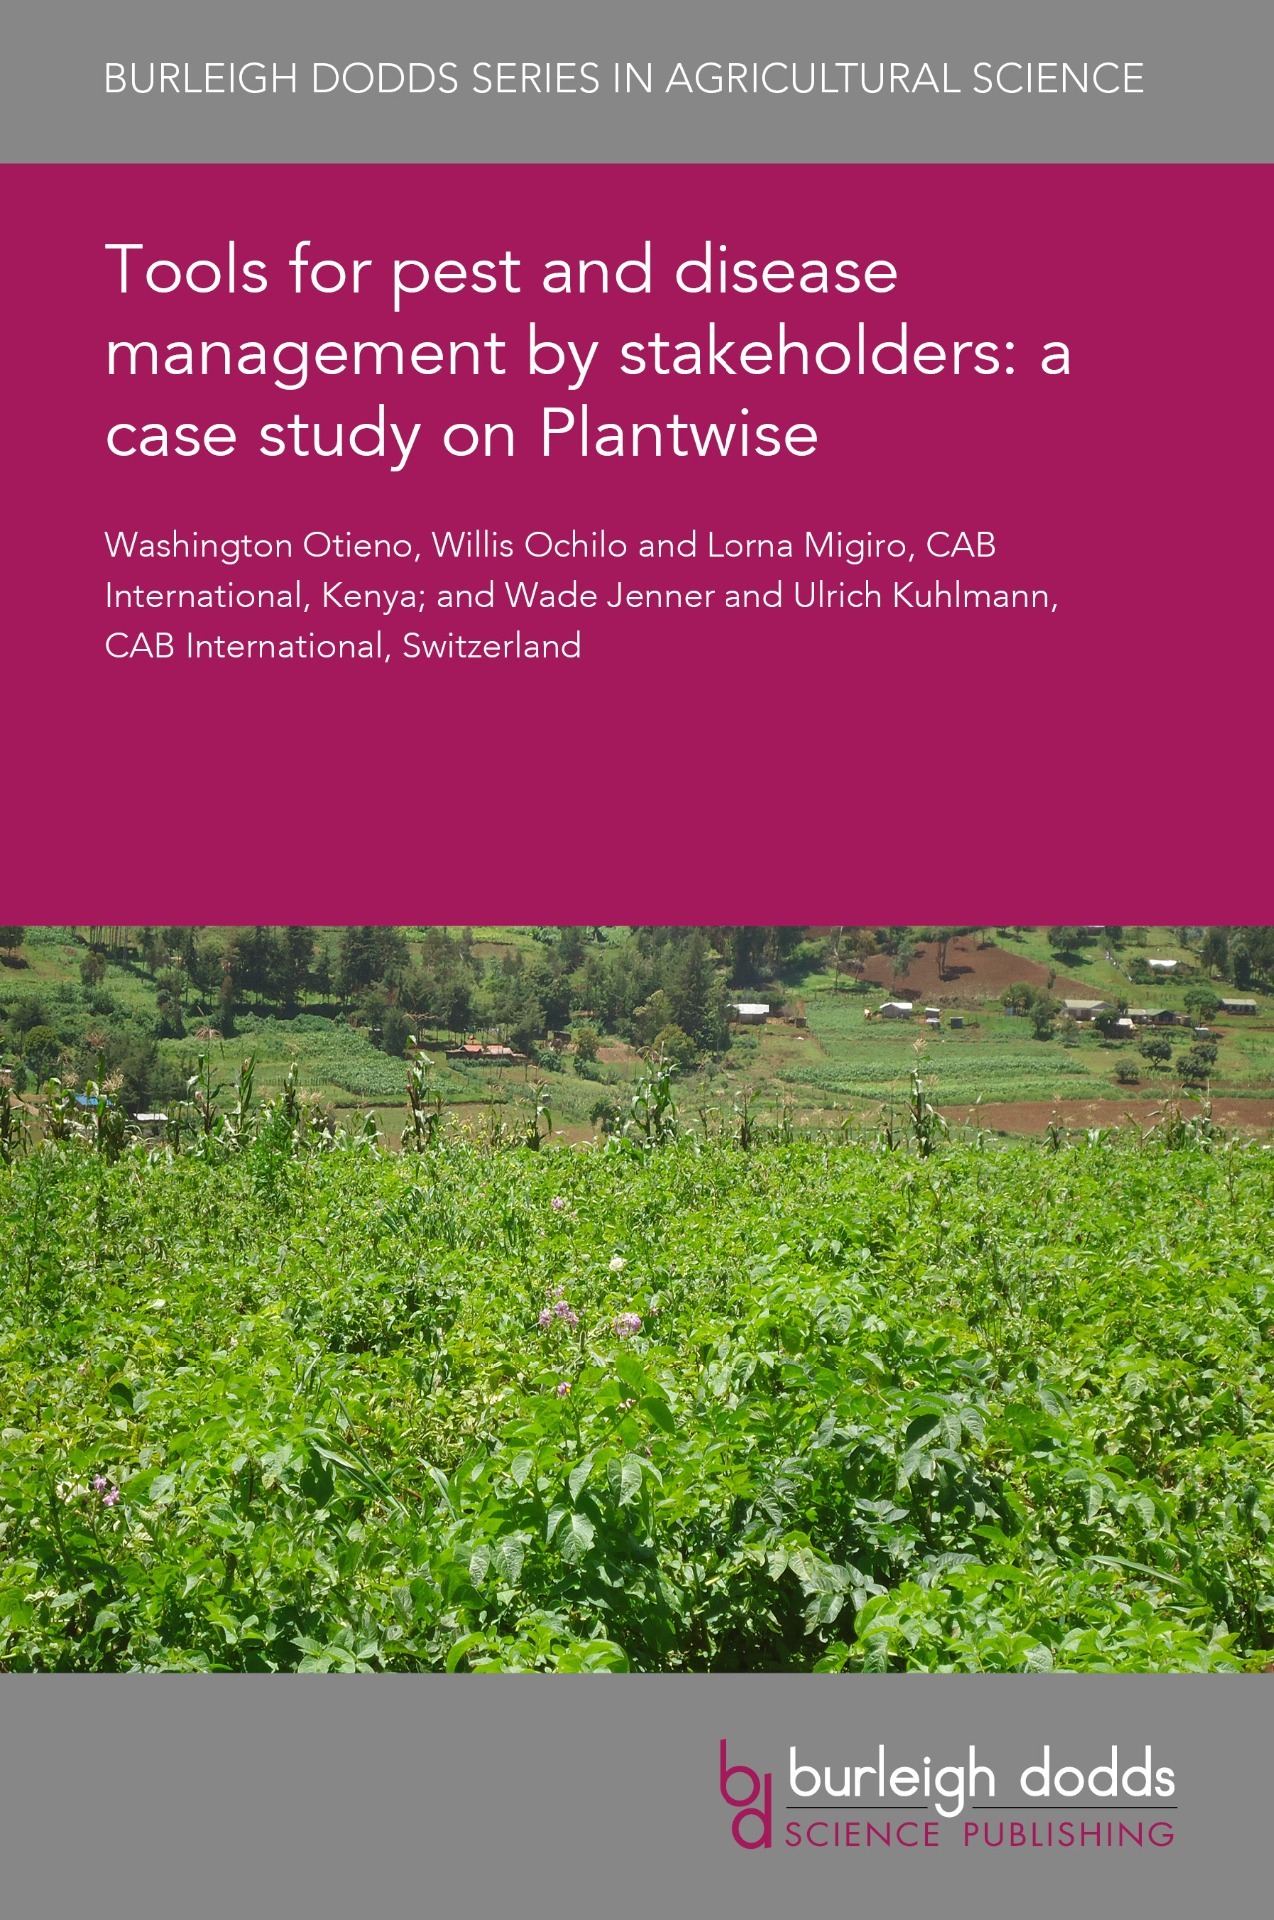 Tool for pest and disease management by stakeholders: a case study on Plantwise